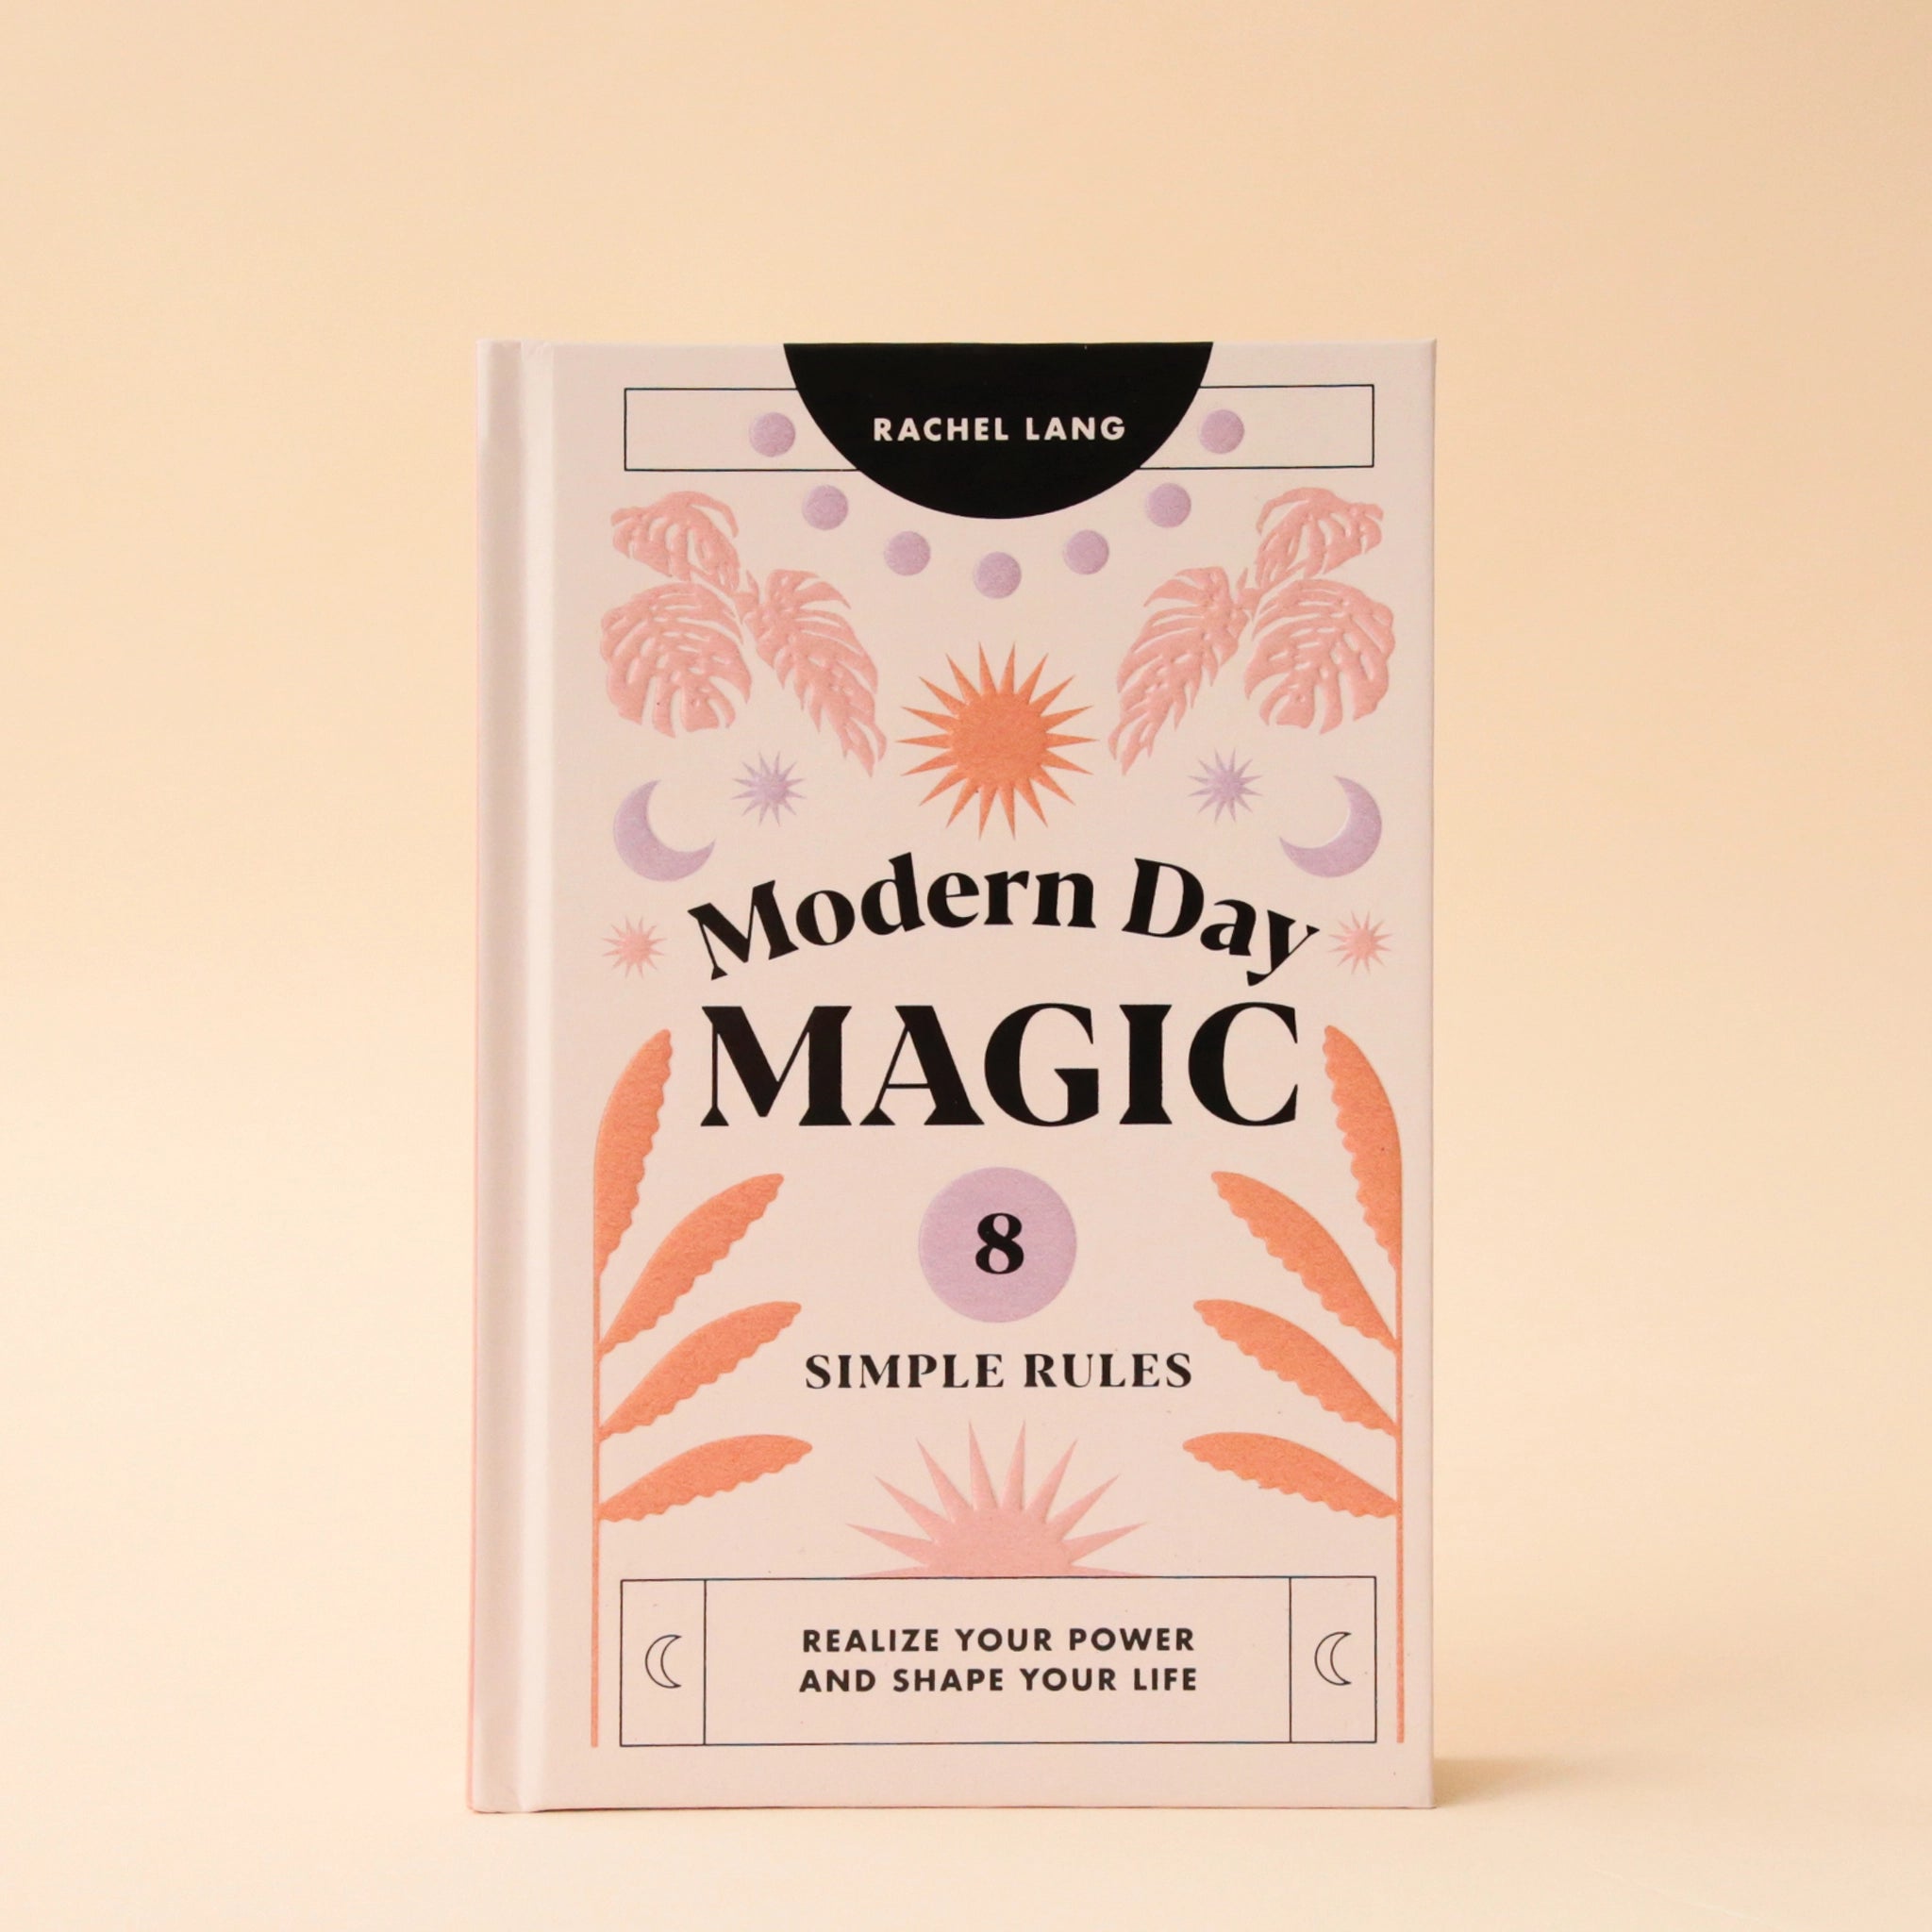 A light pink book cover with pink, lavender and orange foliage and sun and moon graphics along with black text that reads, "Modern Day Magic 8 Simple Rules Realize Your Power and Shape Your Life".